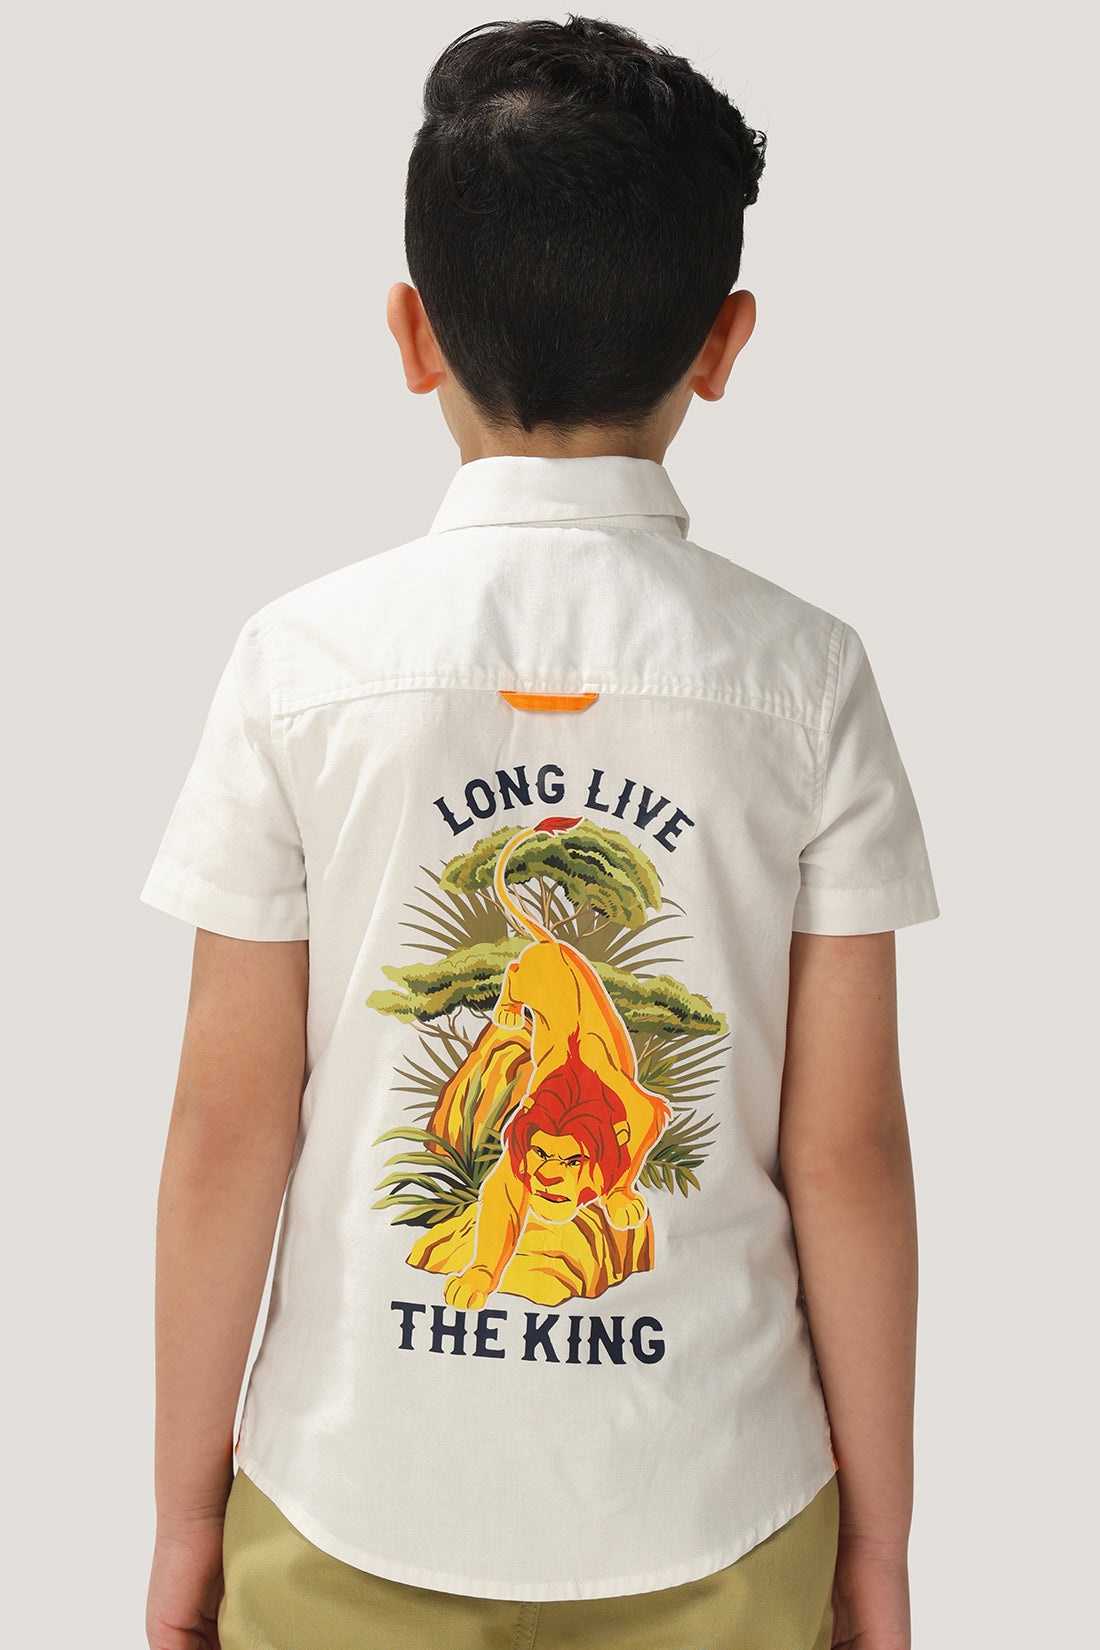 One Friday Kids Boys Off White Lion King Printed Cotton Shirt